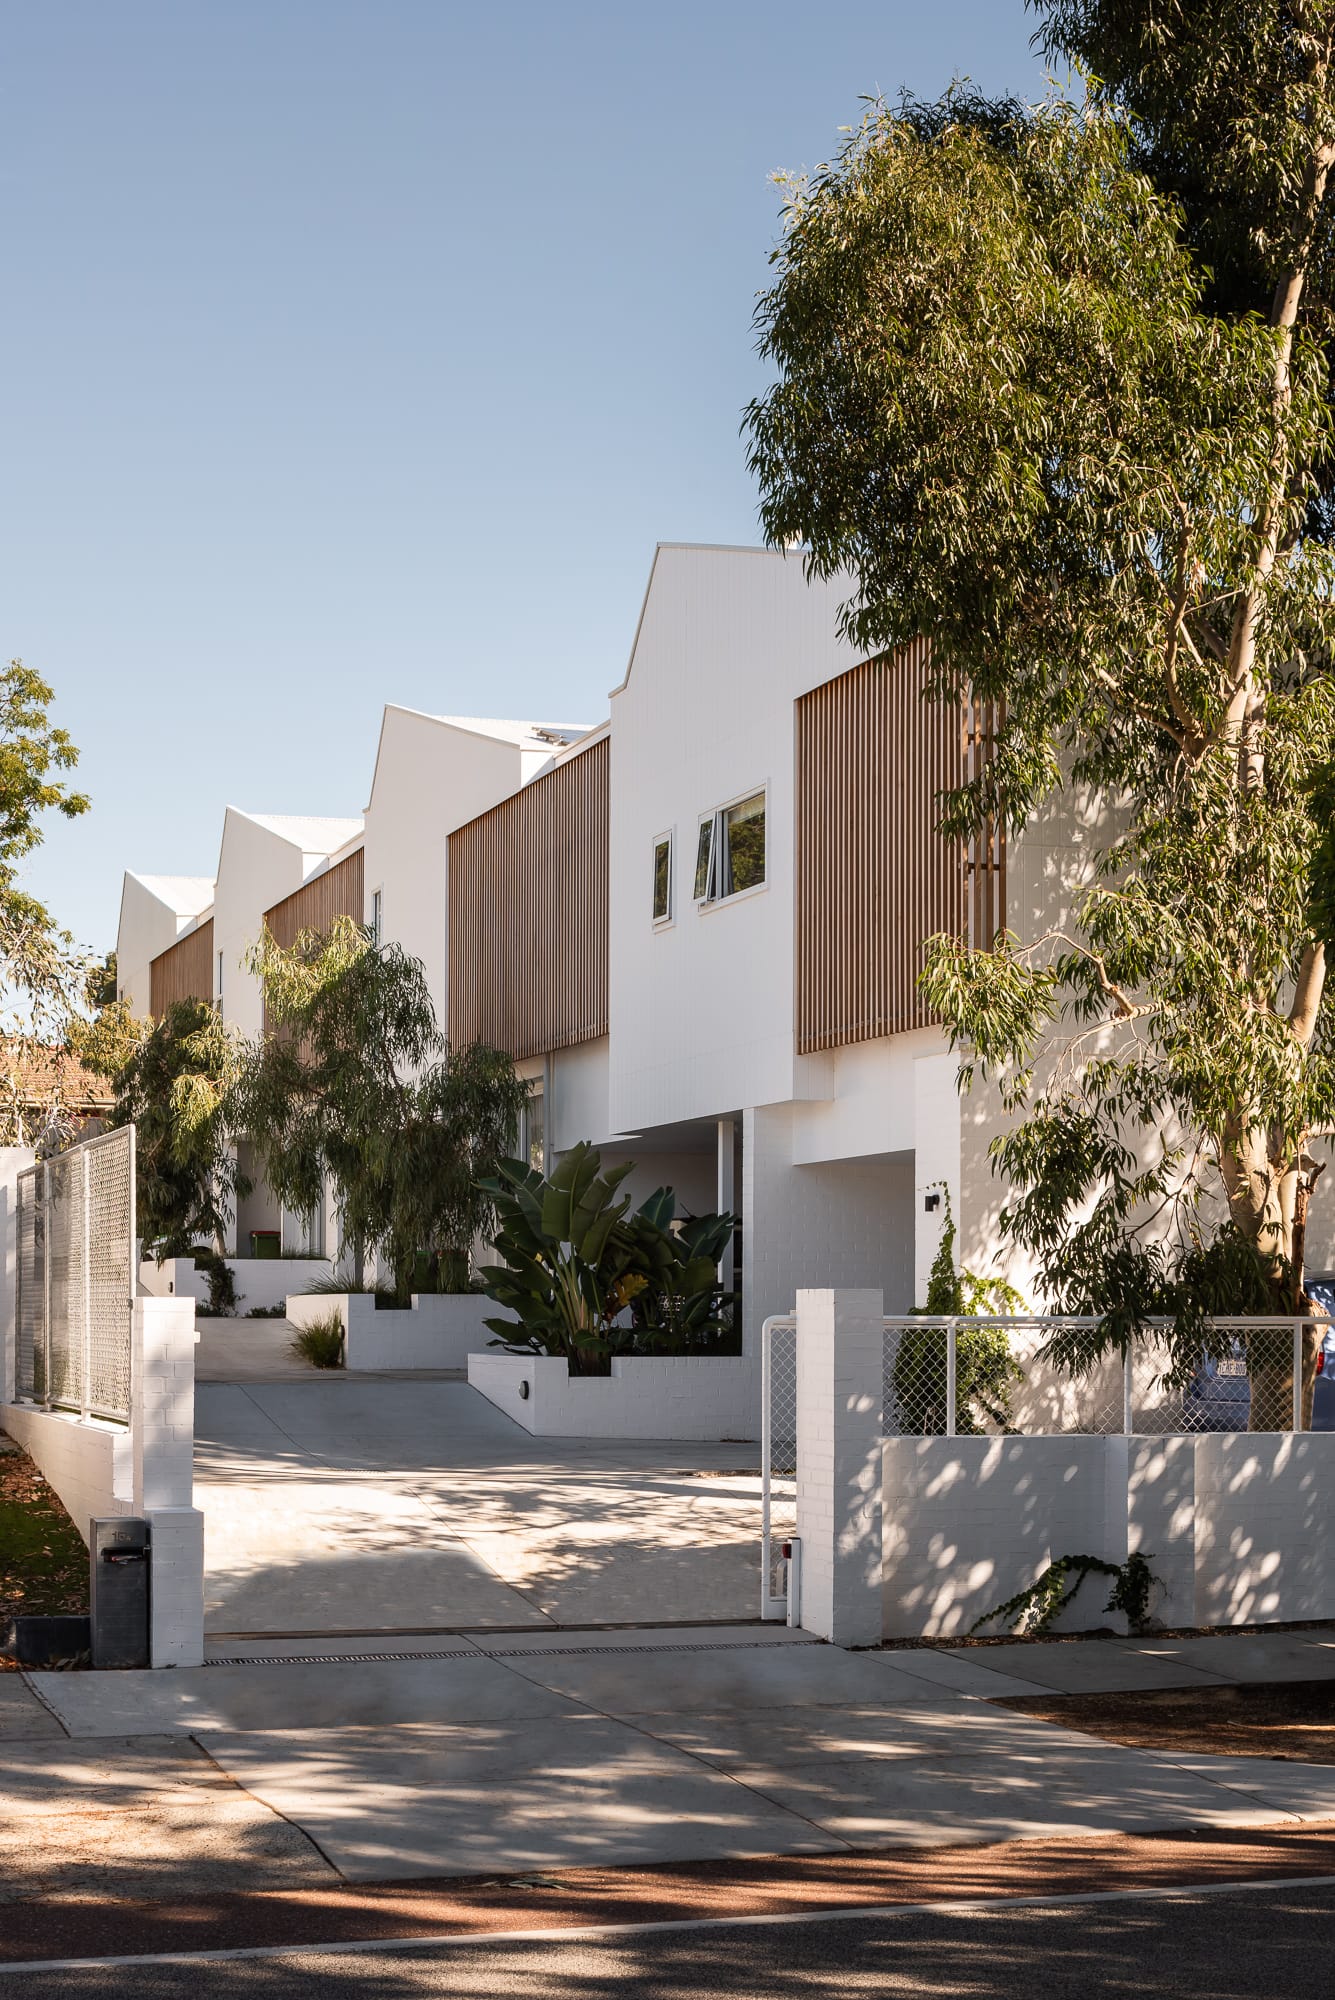 Carrington Street Terraces by MDC Architects.This image presents a view of a row of modern terraced houses with a distinctive architectural style. The buildings feature crisp white facades with vertical wooden slat detailing that adds texture and contrast. Each house has a pointed roof shape, creating an interesting skyline. The front of the homes is landscaped with well-maintained garden beds that include large, broad-leafed plants, adding a touch of greenery against the white walls. A mature tree on the left adds a natural element to the urban environment. The scene is well-lit with natural sunlight, casting soft shadows on the driveway and white boundary fence, which provides privacy while complementing the modern aesthetic of the houses. 